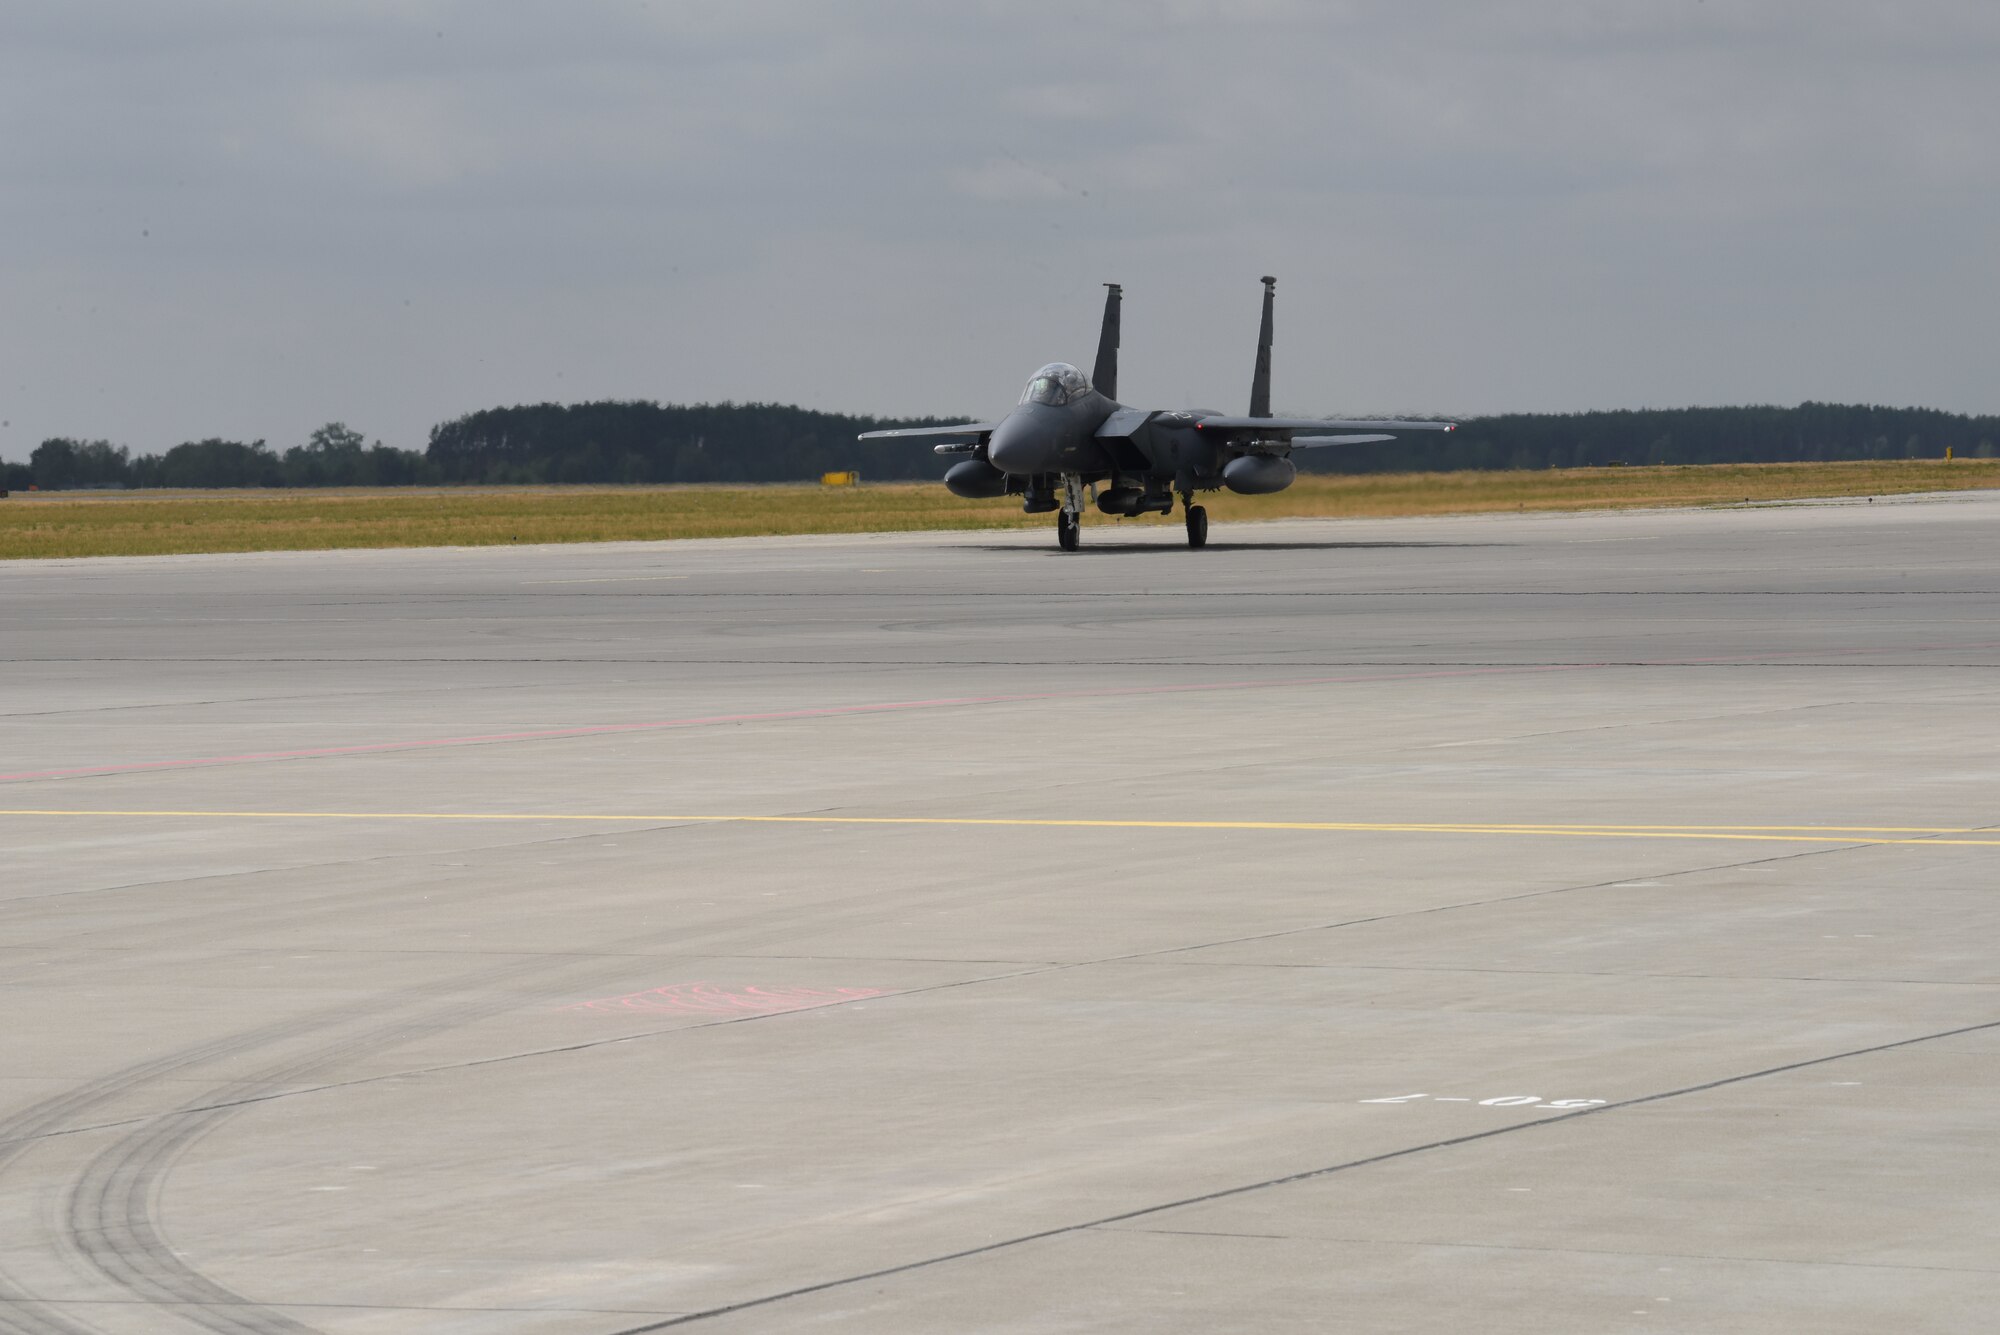 A F-15 Strike Eagle aircraft deployed from the 336th Fighter Squadron, 4th Fighter Wing, Seymour Johnson Air Force Base, N.C., taxis on a runway during Operation Rapid Forge on Powidz Air Base, Poland, July, 16, 2019. Operation Rapid Forge is intended to enhance interoperability with NATO allies to improve combined operational capabilities.